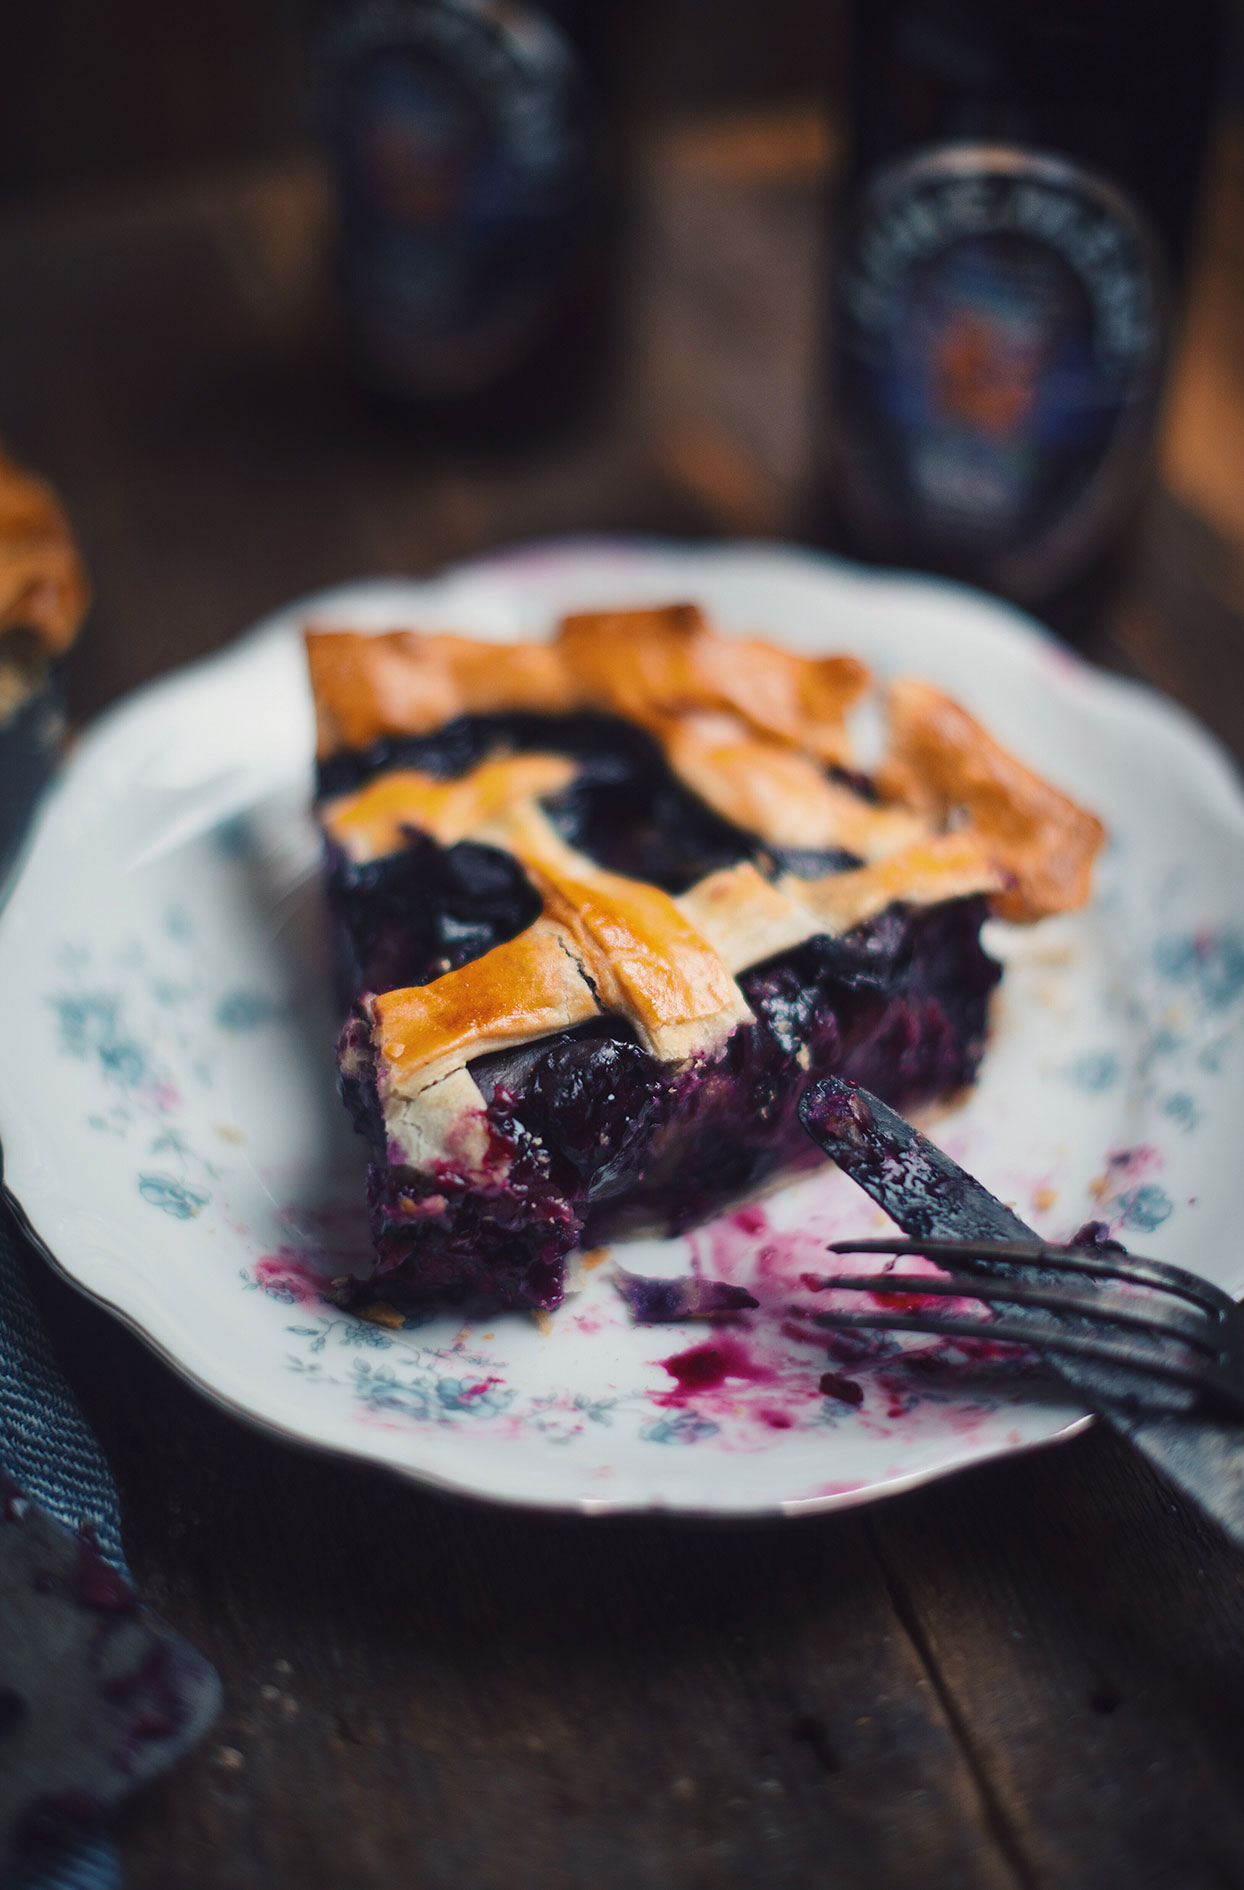 Blueberry pie with beer and lemon zest